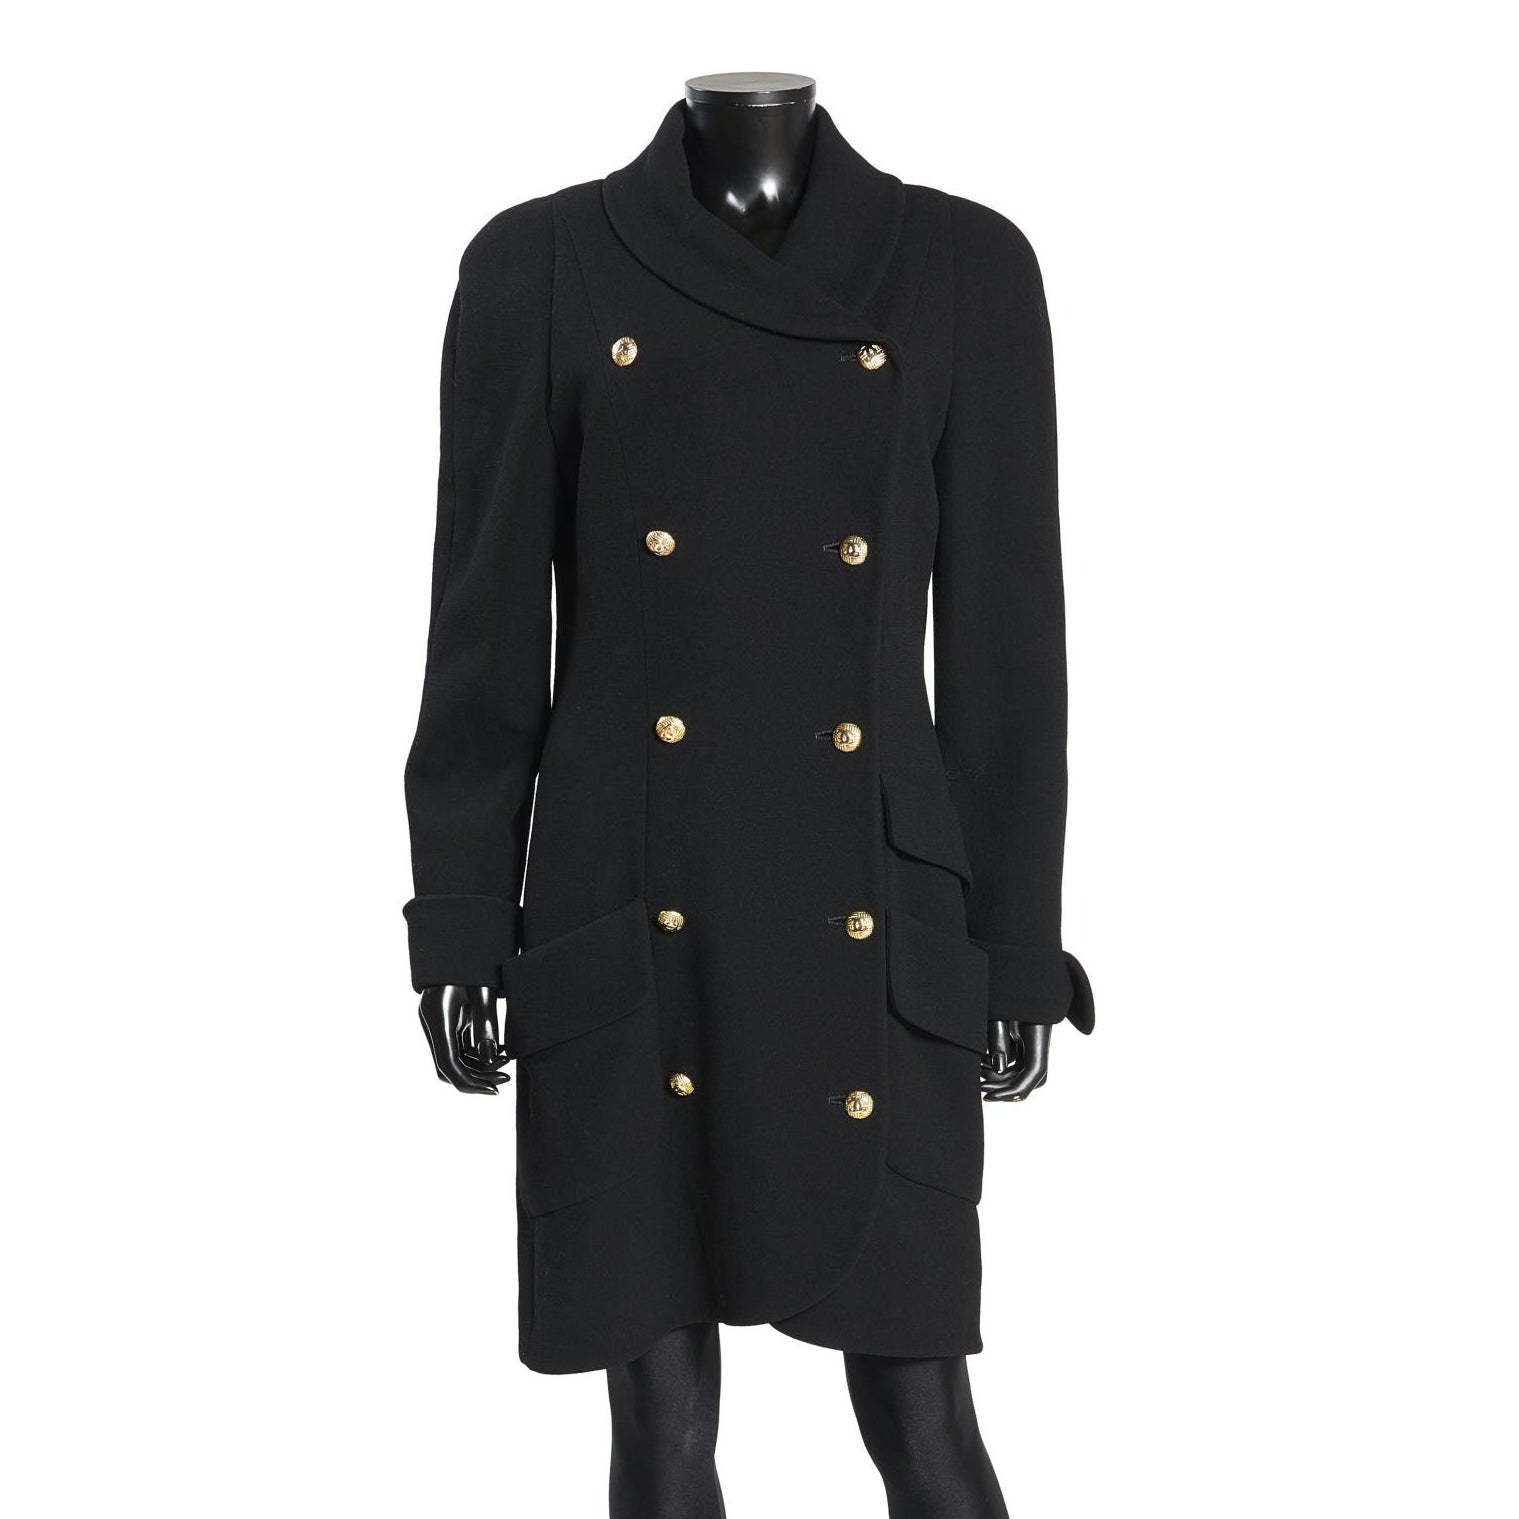 Chanel Boutique Black Wool Coat Dress with Gold Chanel Buttons - Medium